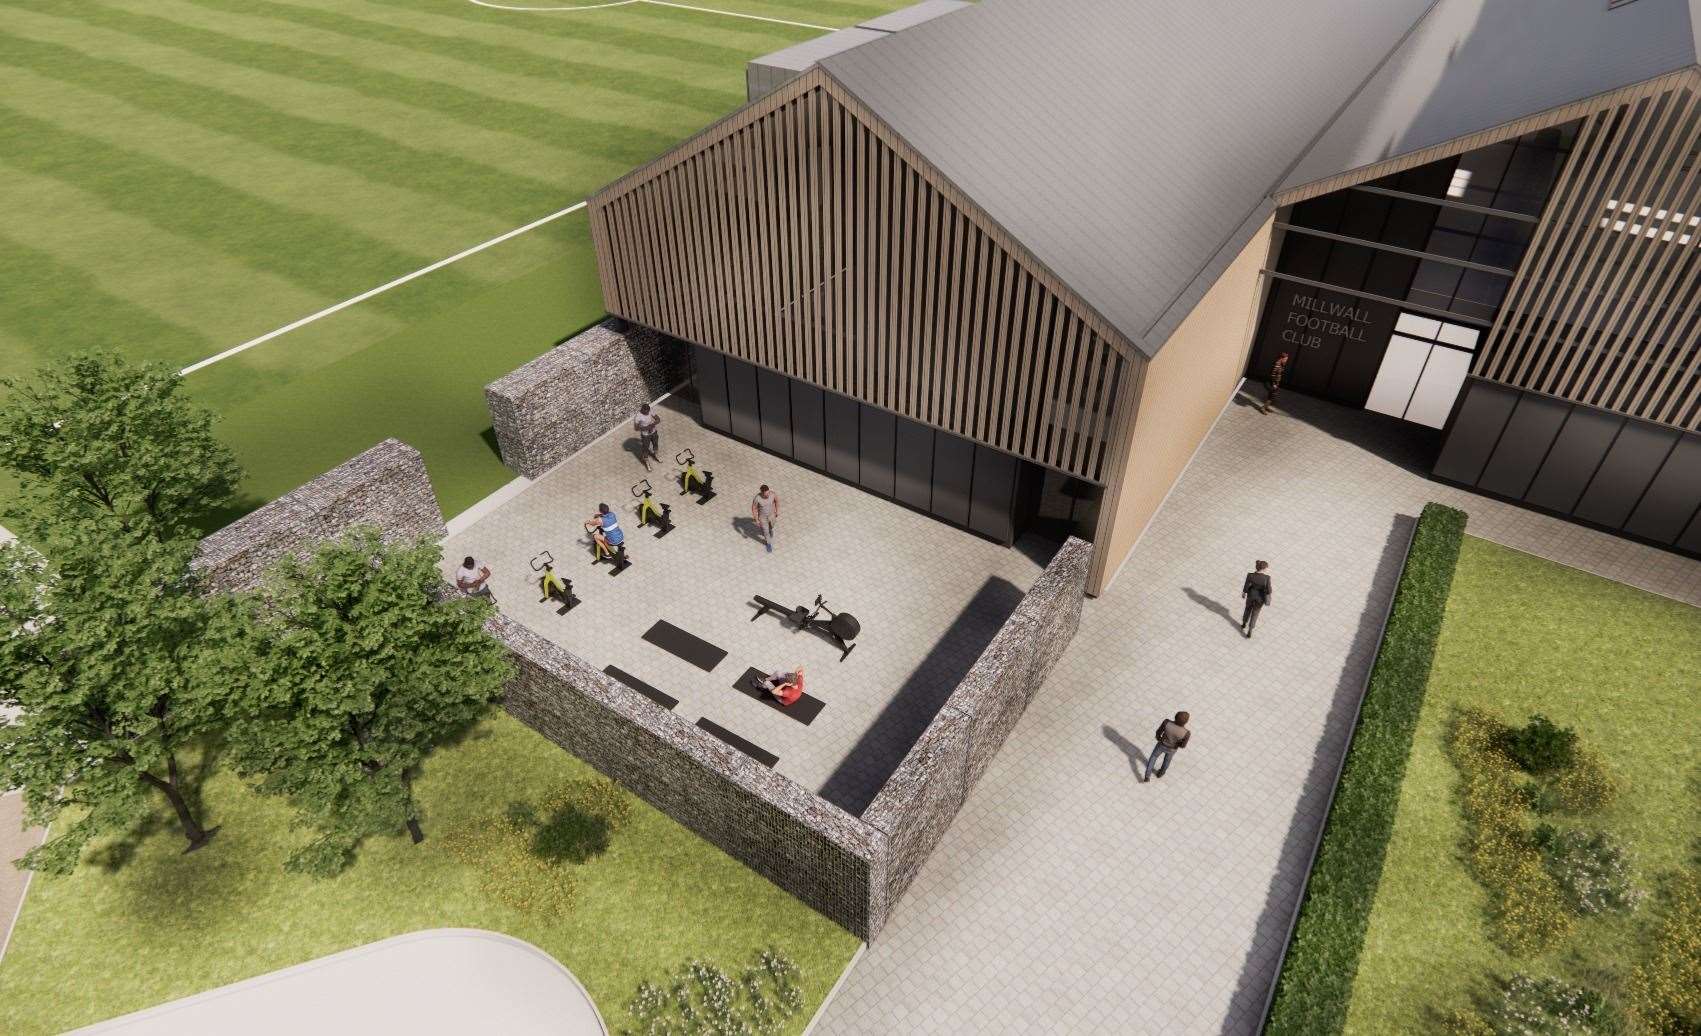 An outside gym area for players and staff. Photo: AFL